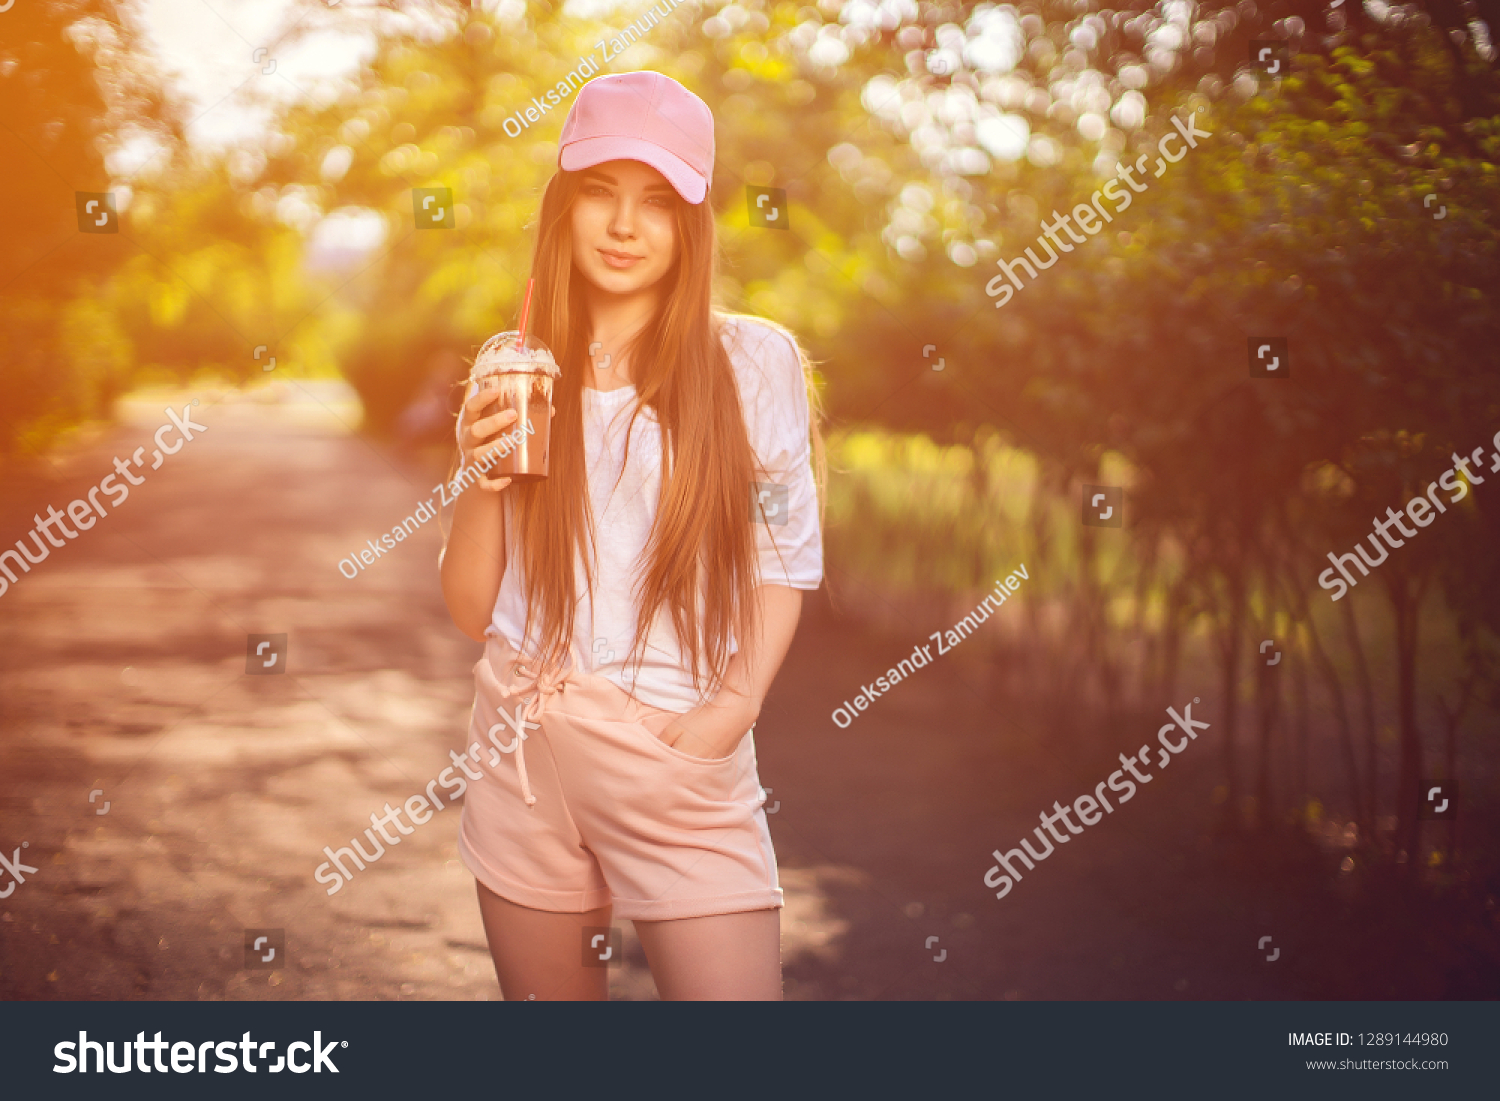 Pretty confident brunette in cap and summer outfit holding chocolate drink in cup looking at camera with smile in nature #1289144980